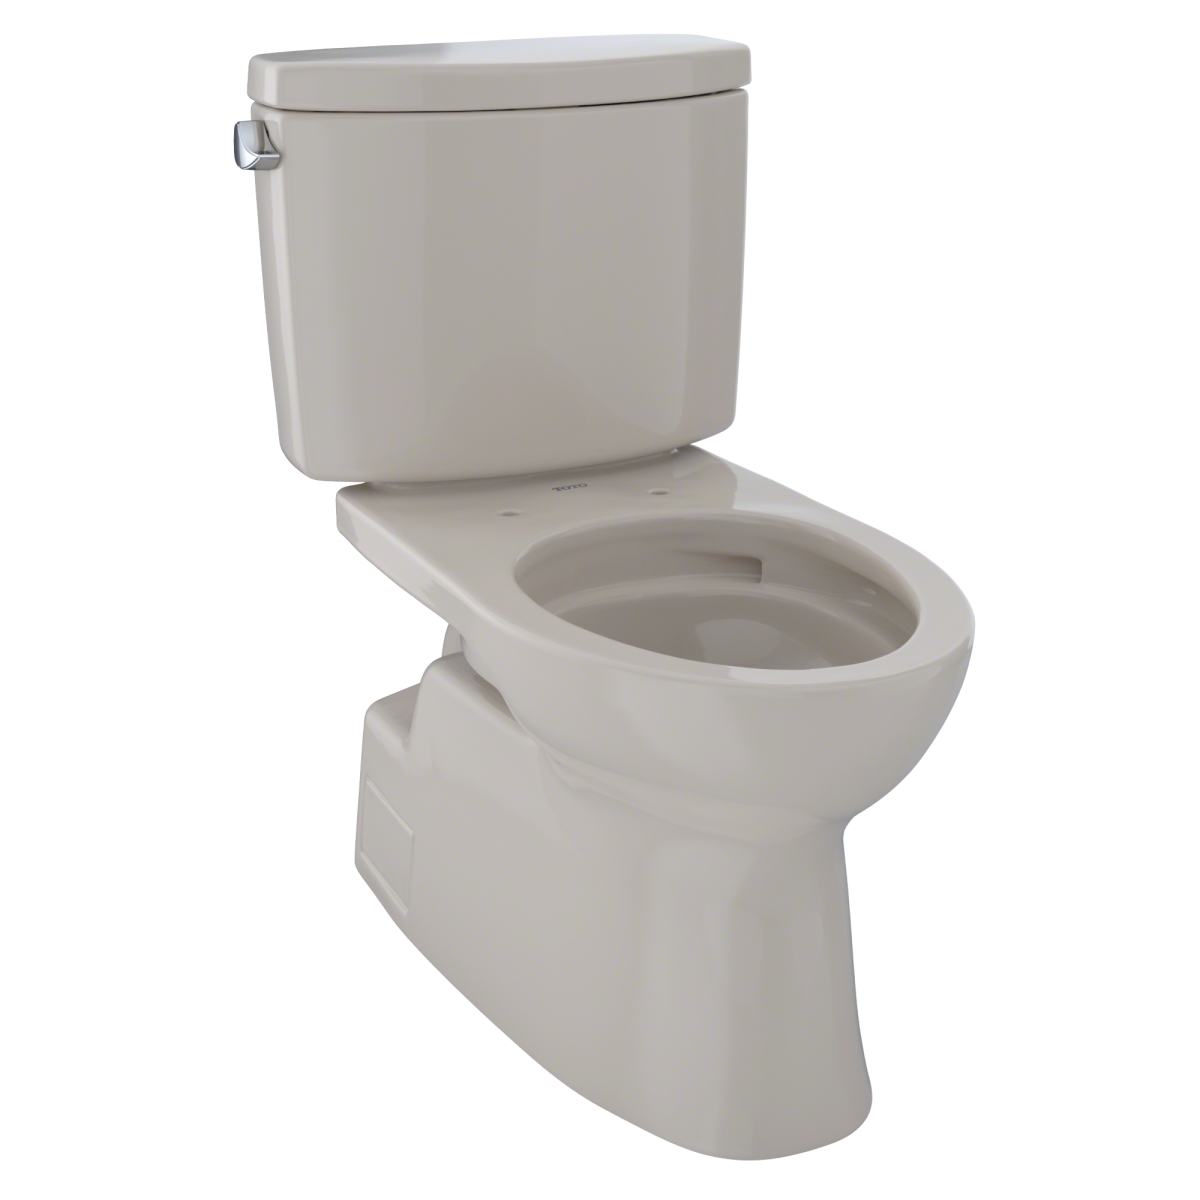 Cst474cefg No.03 Vespin Ii Elongated 1.28 Gpf Universal Height Skirted Design Toilet With Cefiontect, Bone - 2 Piece